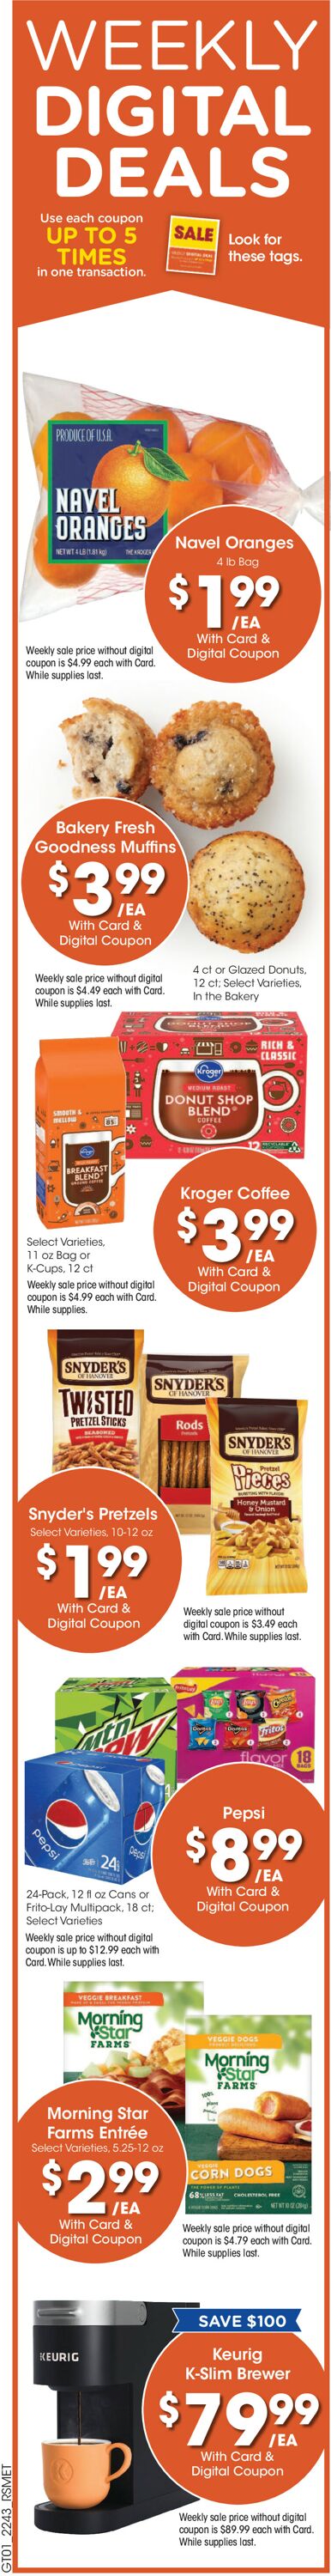 Pick ‘n Save Ad from 11/25/2022